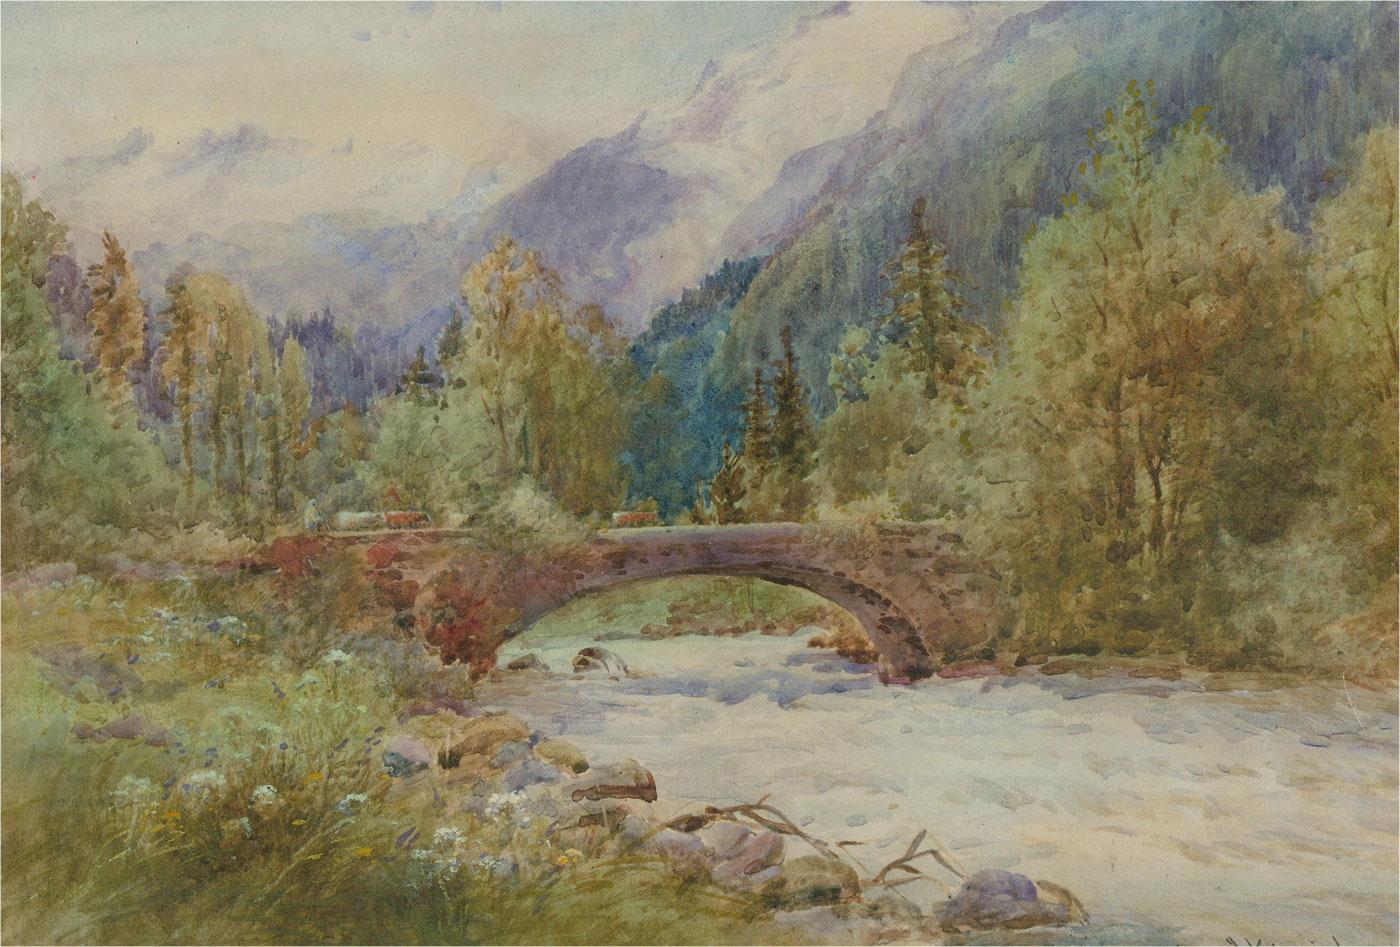 A fine watercolour painting with body colour details by the British artist Henry John Kinnaird. The scene depicts a Swiss river landscape view with snow covered mountains in the distance. The colour palette and overall balance of the composition